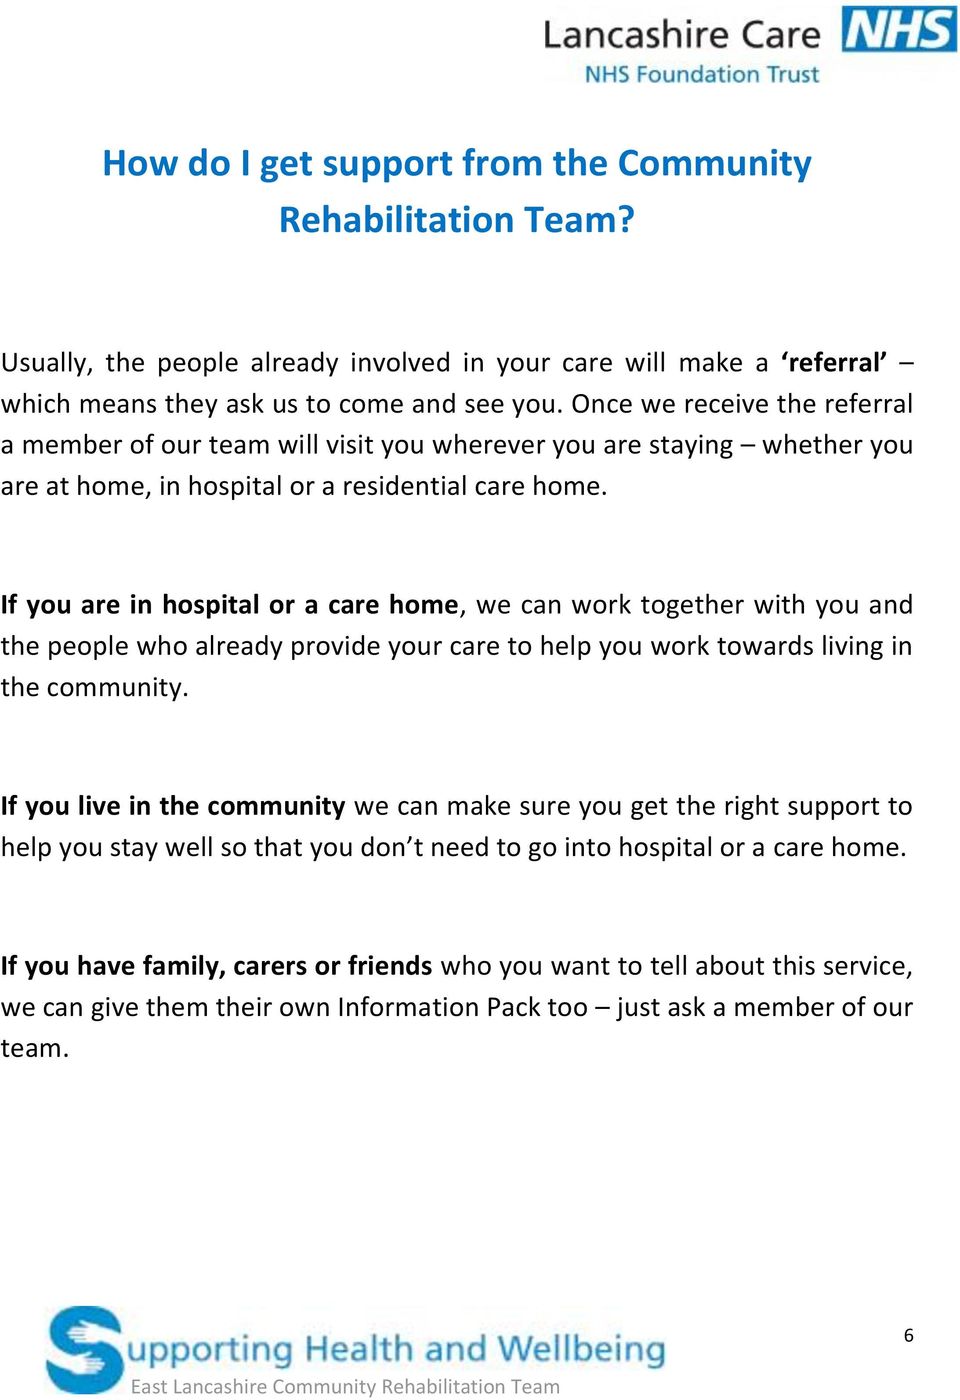 If you are in hospital or a care home, we can work together with you and the people who already provide your care to help you work towards living in the community.